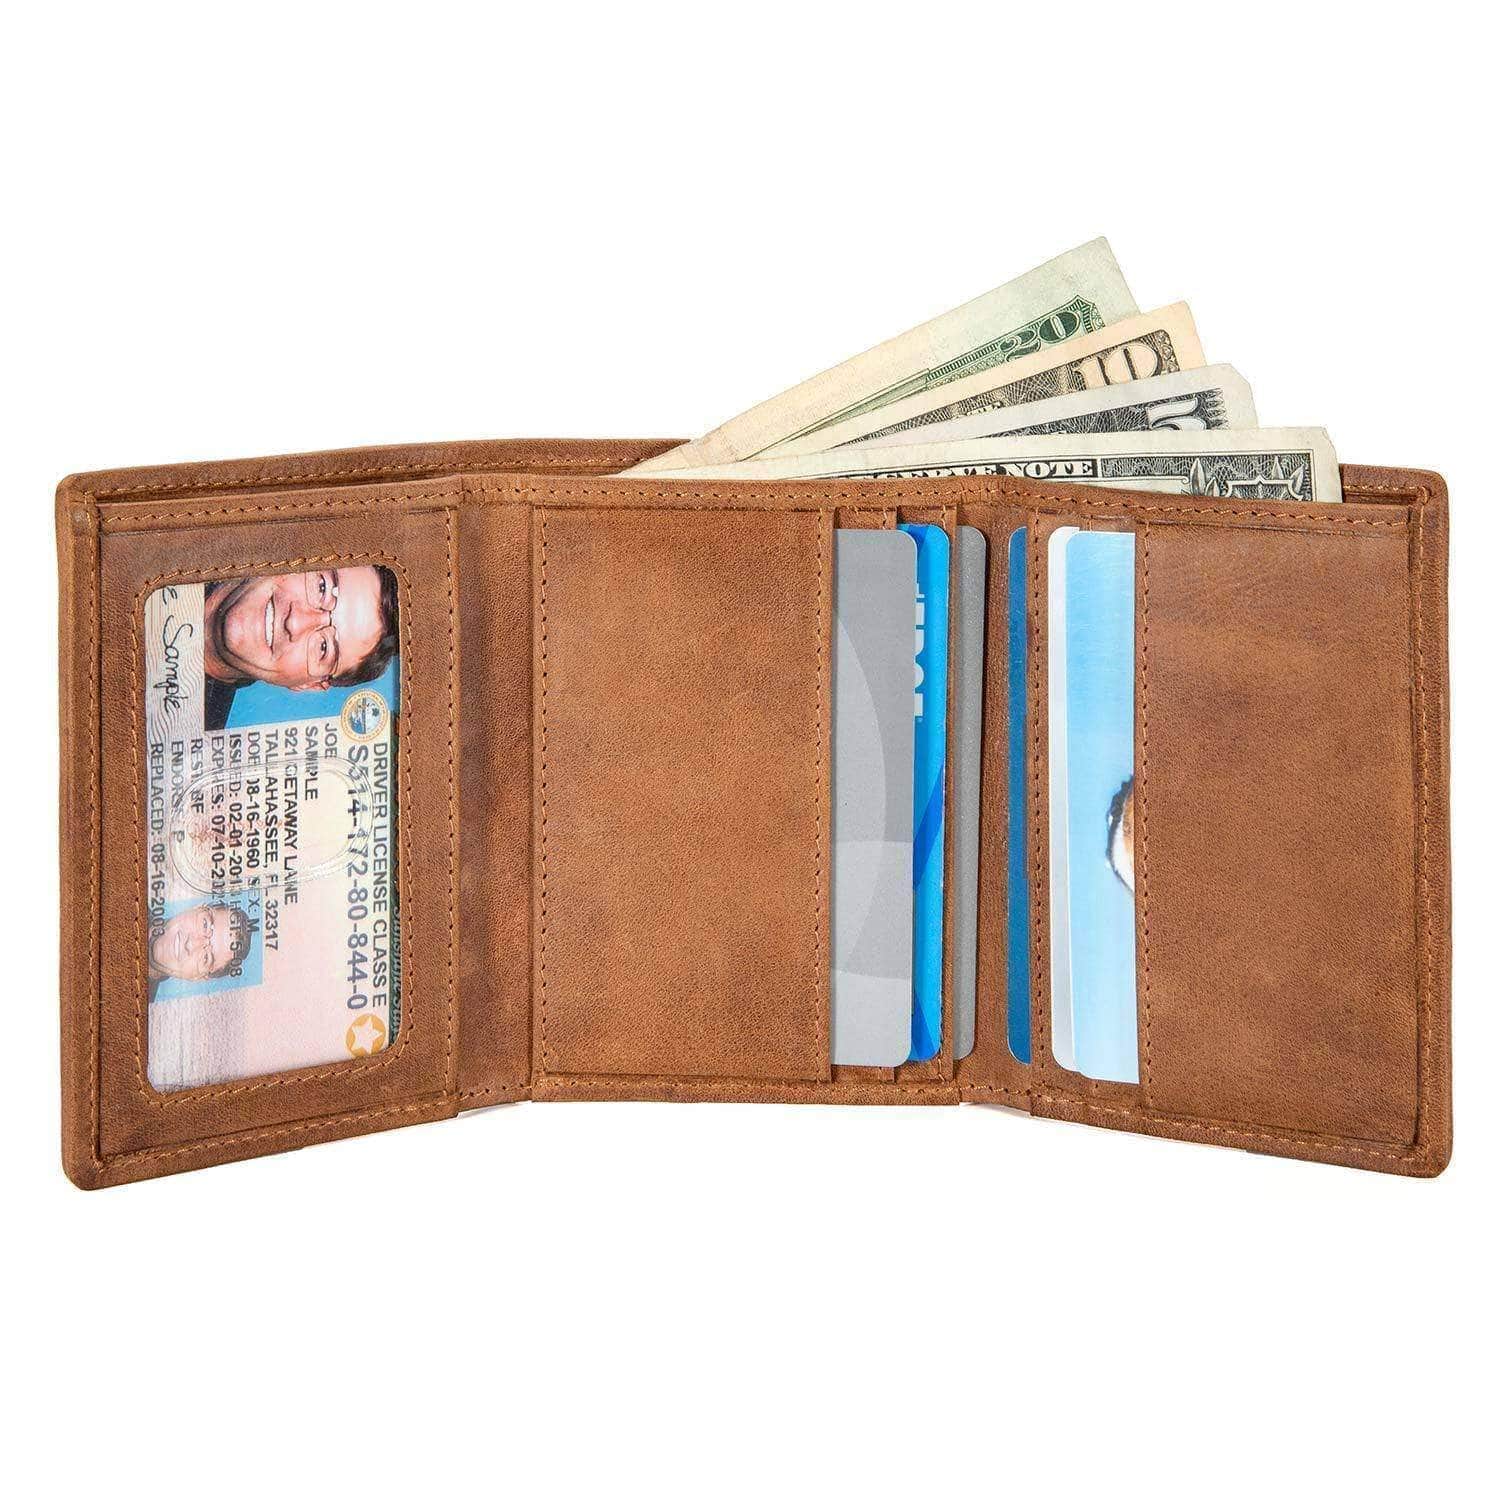 ID Stronghold  RFID Wallet Women's Trifold